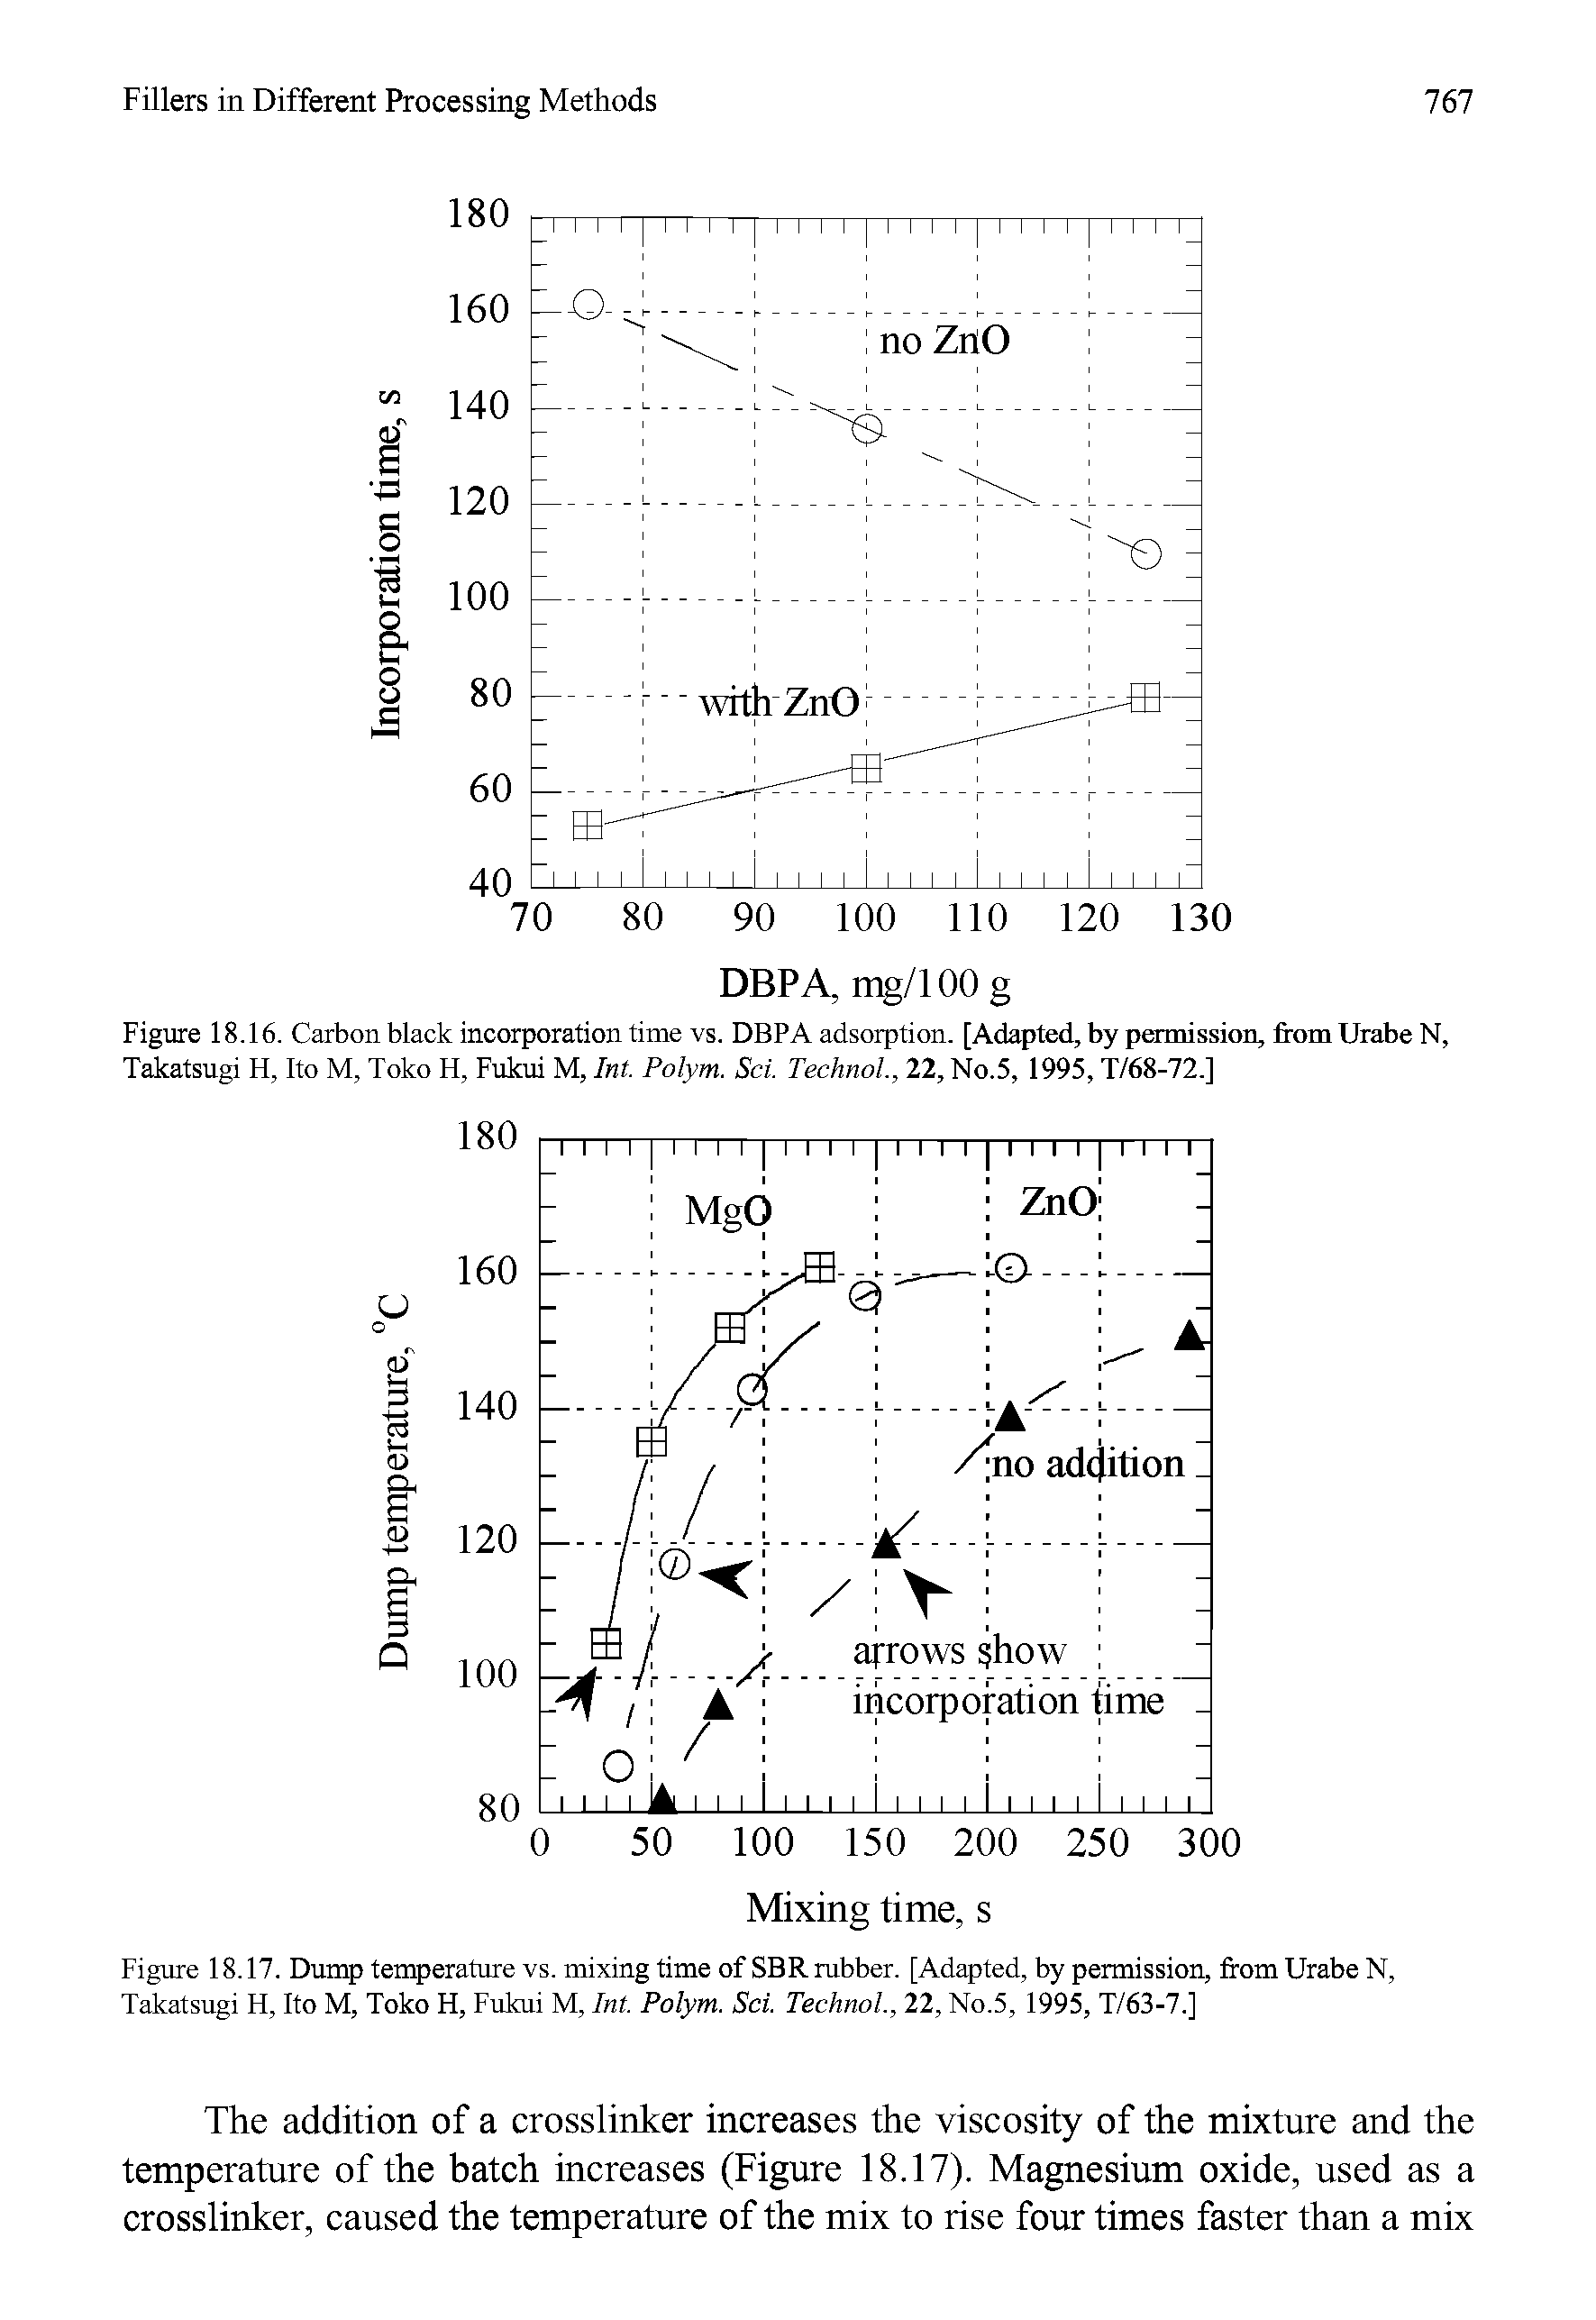 Figure 18.16. Carbon black incorporation time vs. DBPA adsorption. [Adapted, by permission, from Urabe N, Takatsugi H, Ito M, Toko II. Fukui M, Int. Polym. Sci. Technol., 22, No.5, 1995, T/68-72.]...